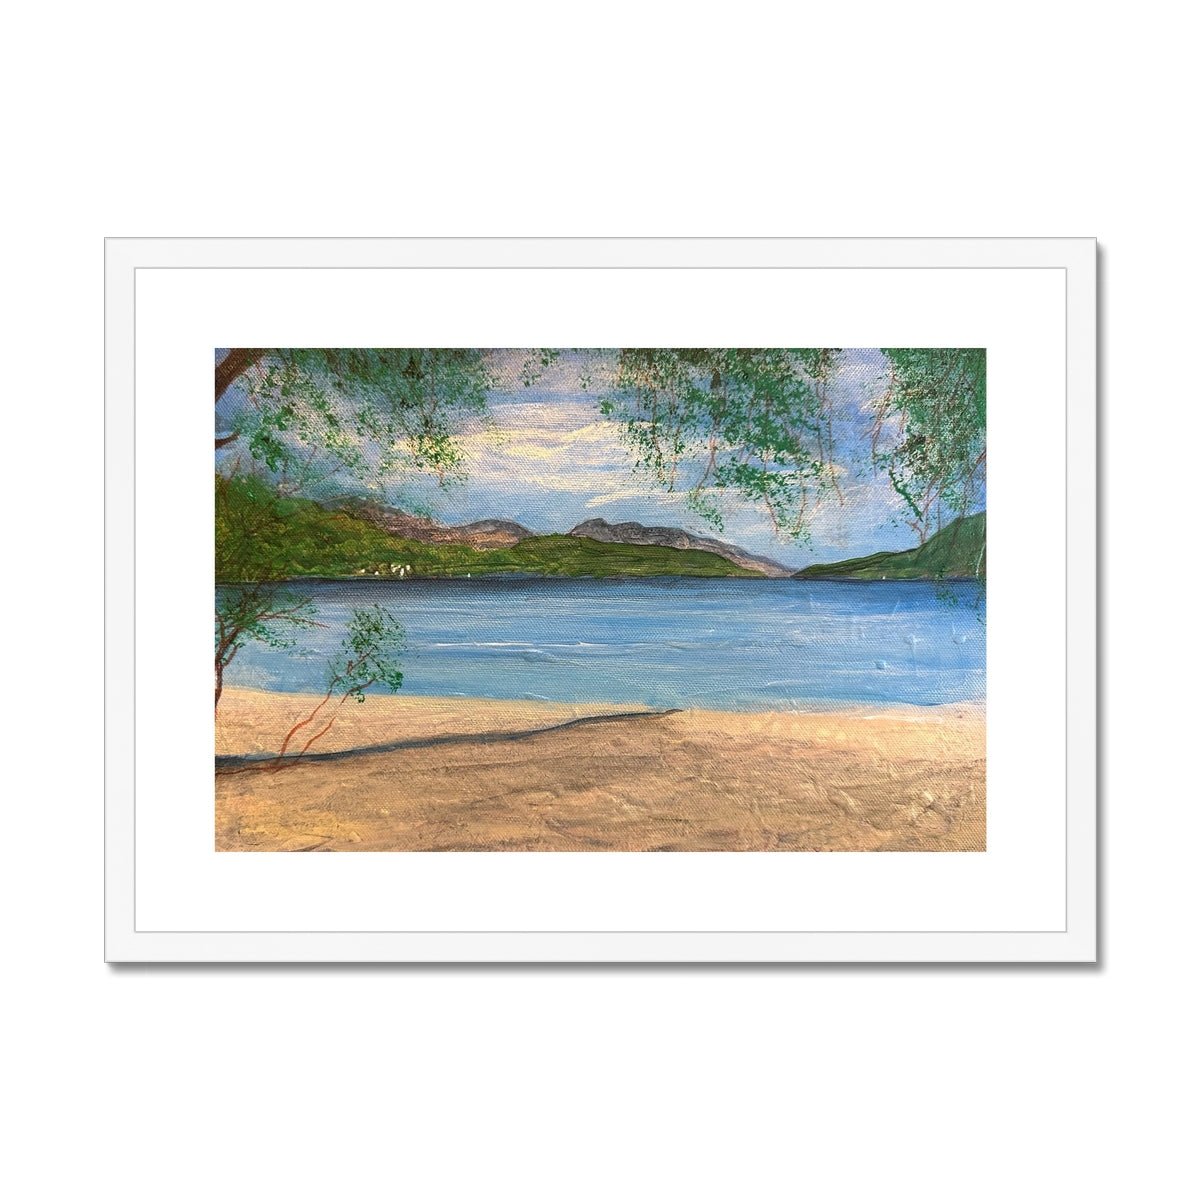 Firkin Point Loch Lomond Painting | Framed & Mounted Prints From Scotland-Framed & Mounted Prints-Scottish Lochs & Mountains Art Gallery-A2 Landscape-White Frame-Paintings, Prints, Homeware, Art Gifts From Scotland By Scottish Artist Kevin Hunter